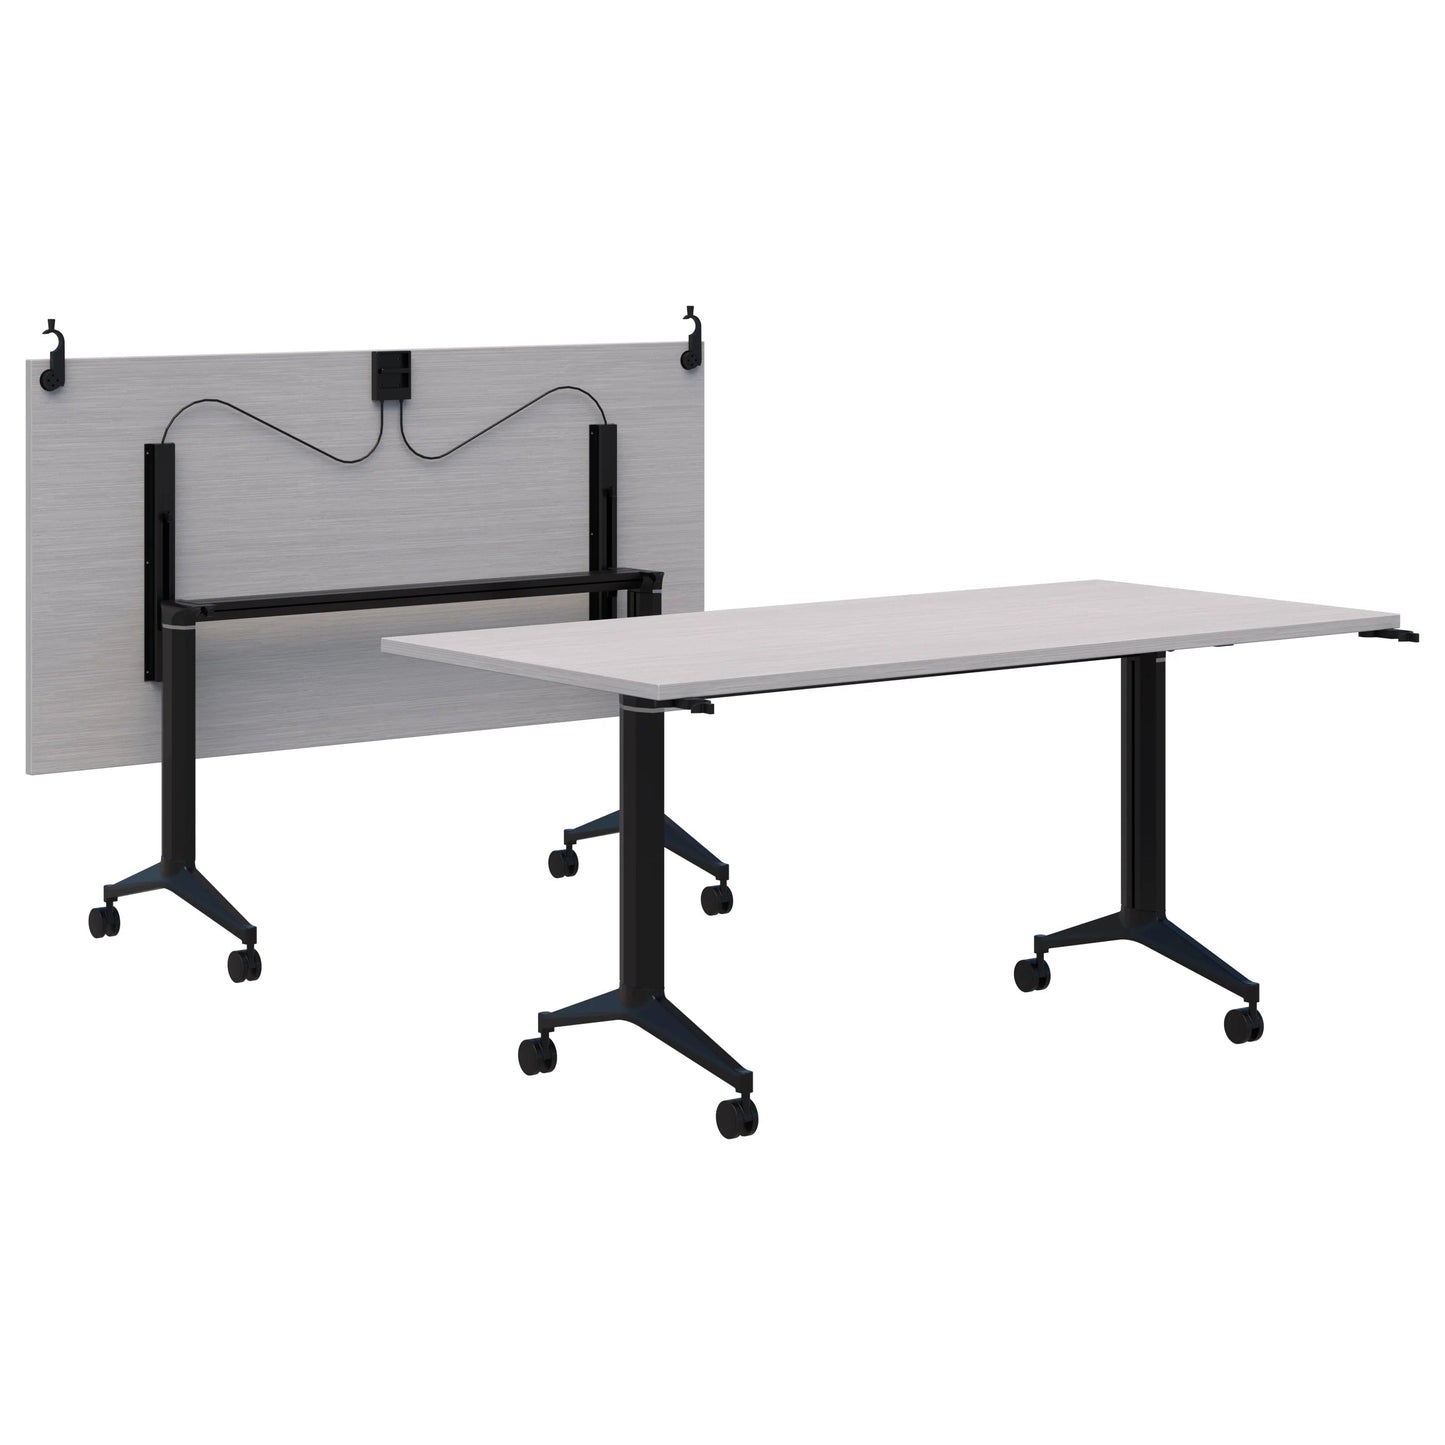 Boost Flip Table with Connectors